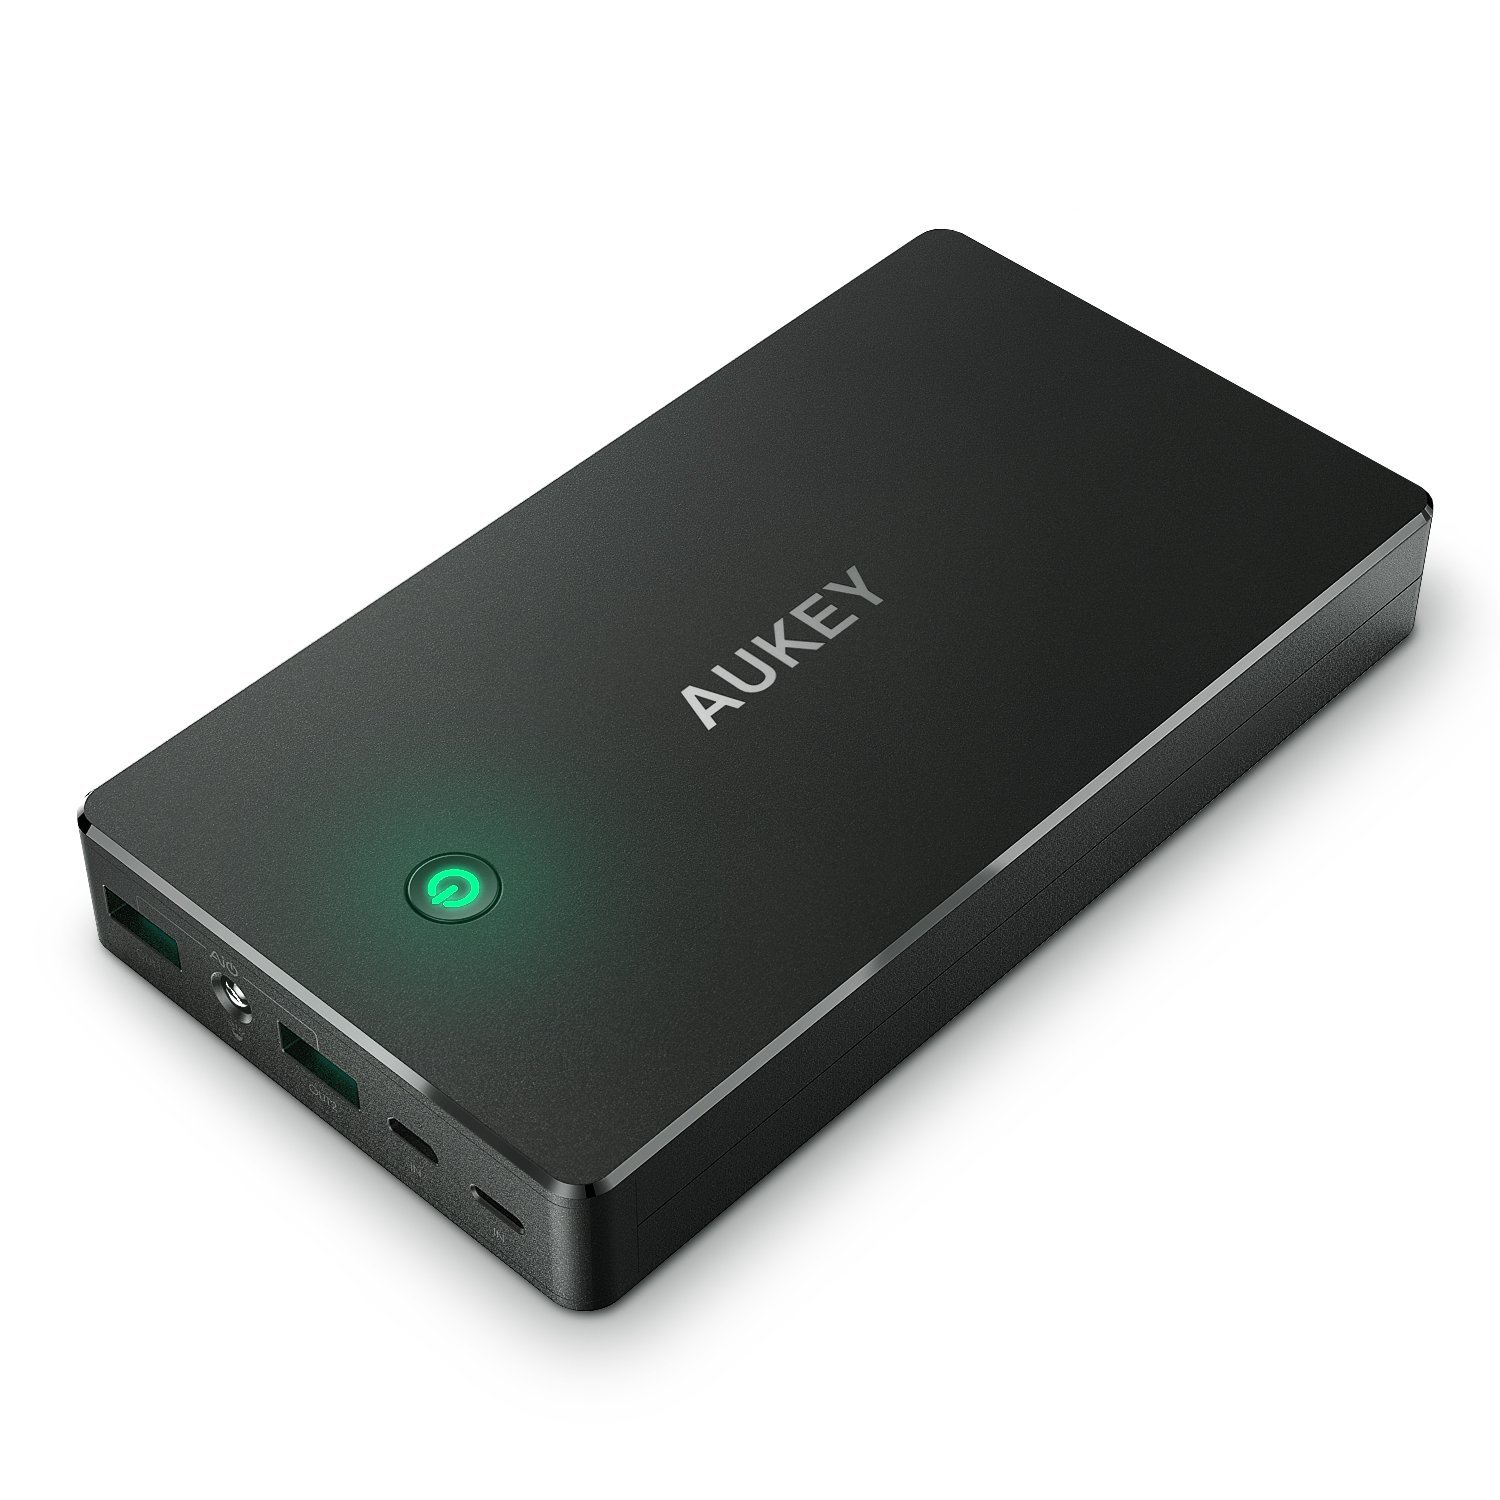 Aukey 20000mAh Dual USB power bank with lightning port for $17